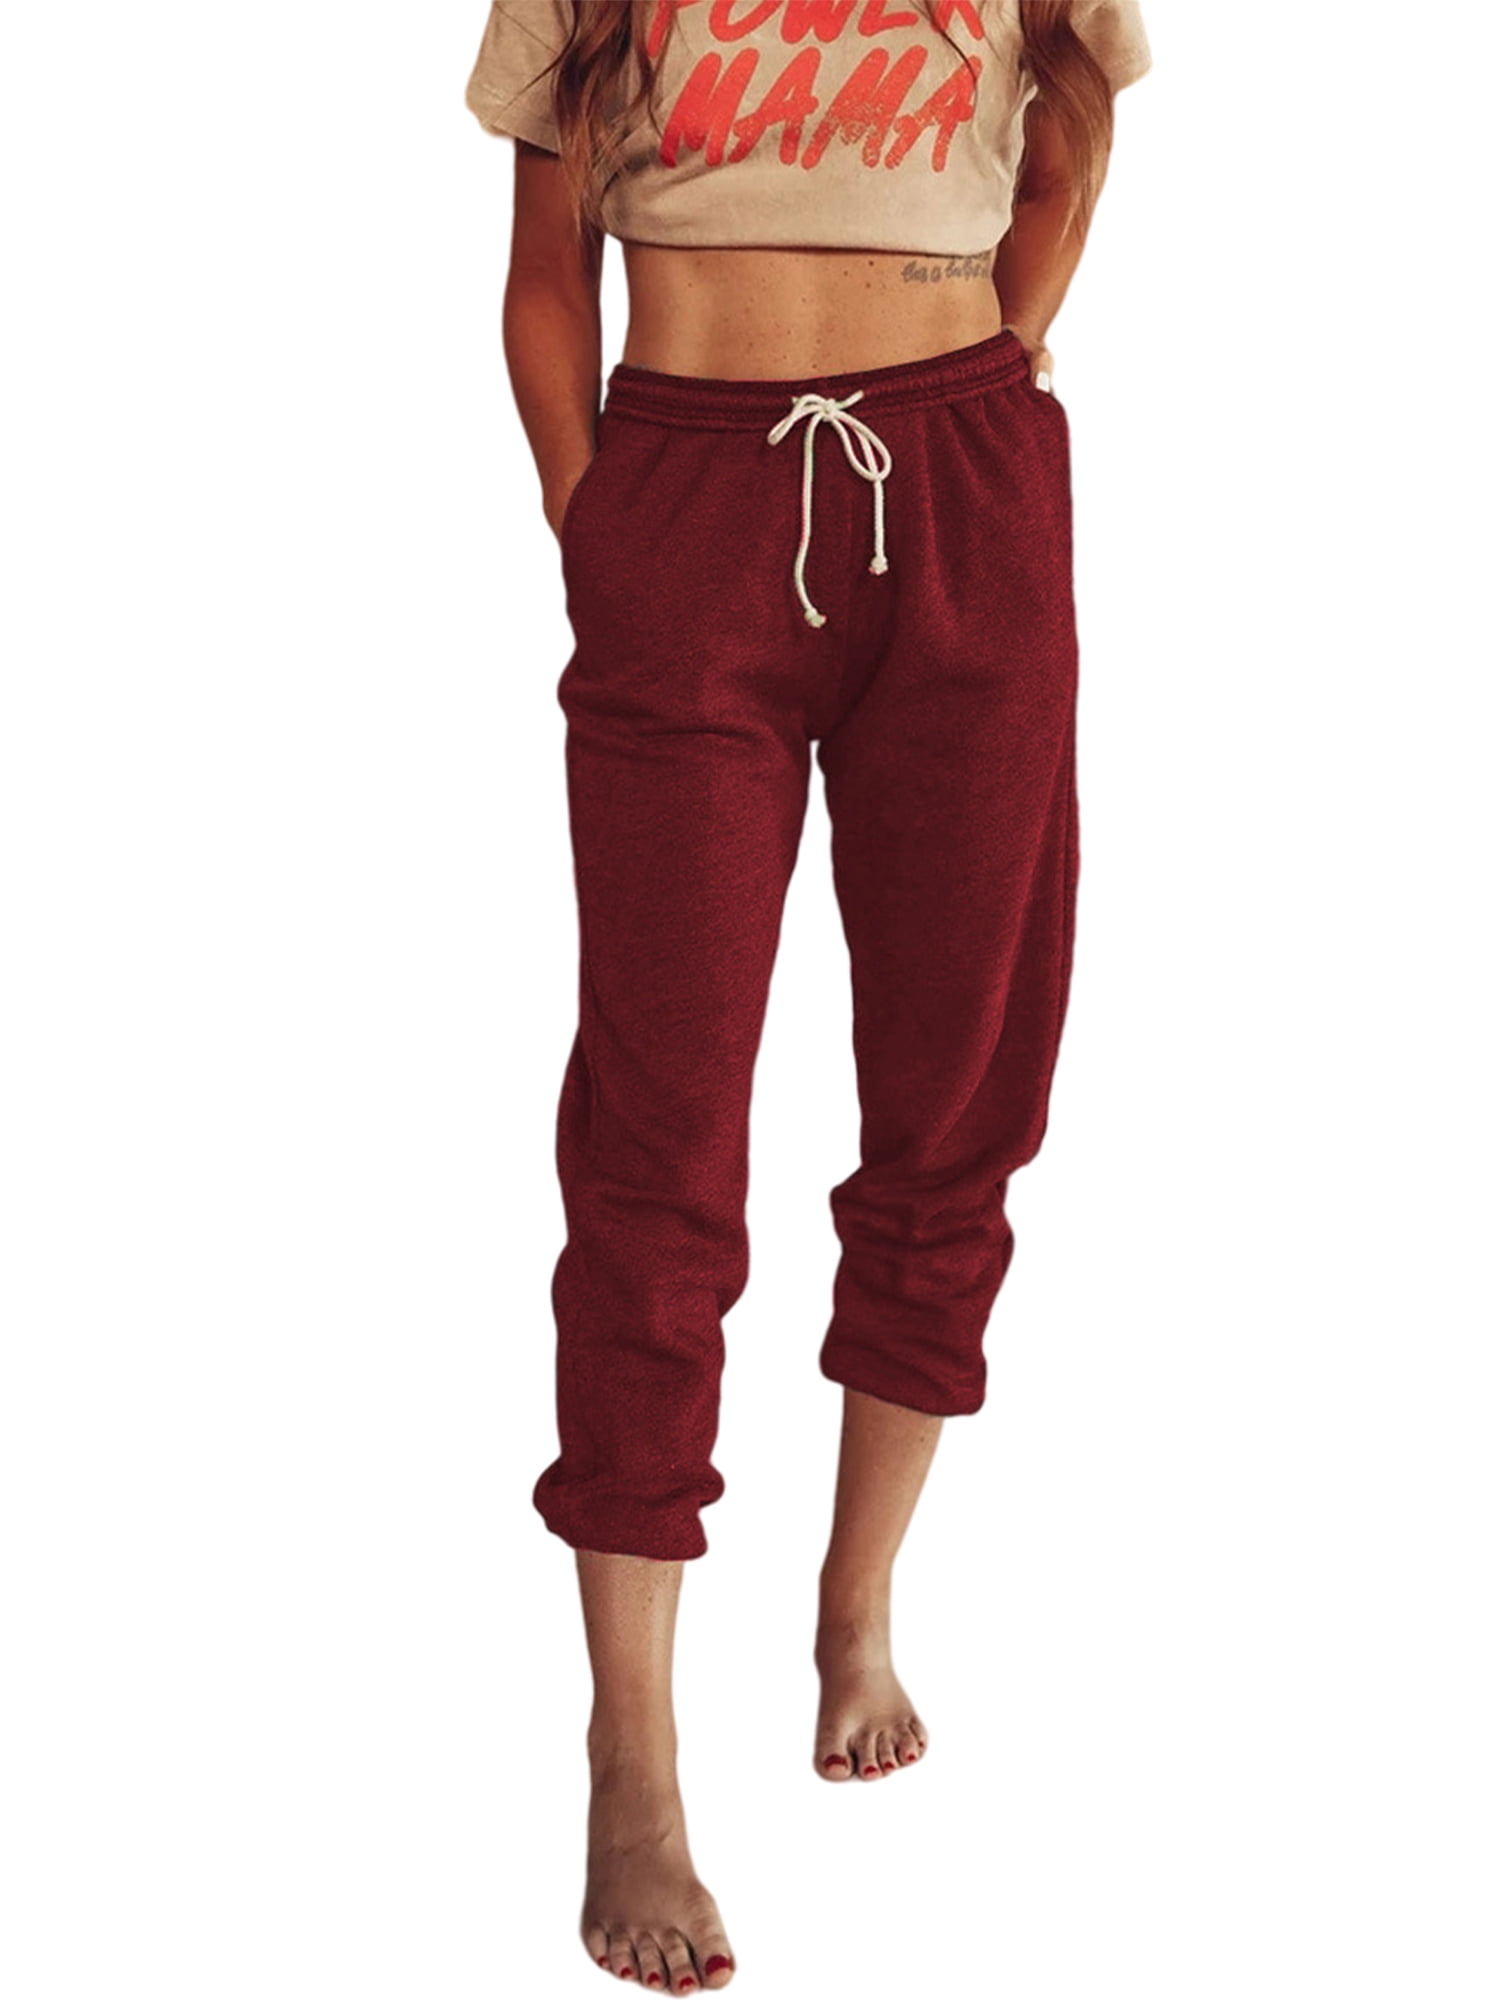 Frontwalk Womens Athletic Works Pants Pockets Drawstring Stretchy Joggers  Sweatpants Solid Color Casual Loose Fit Lounge Trousers 